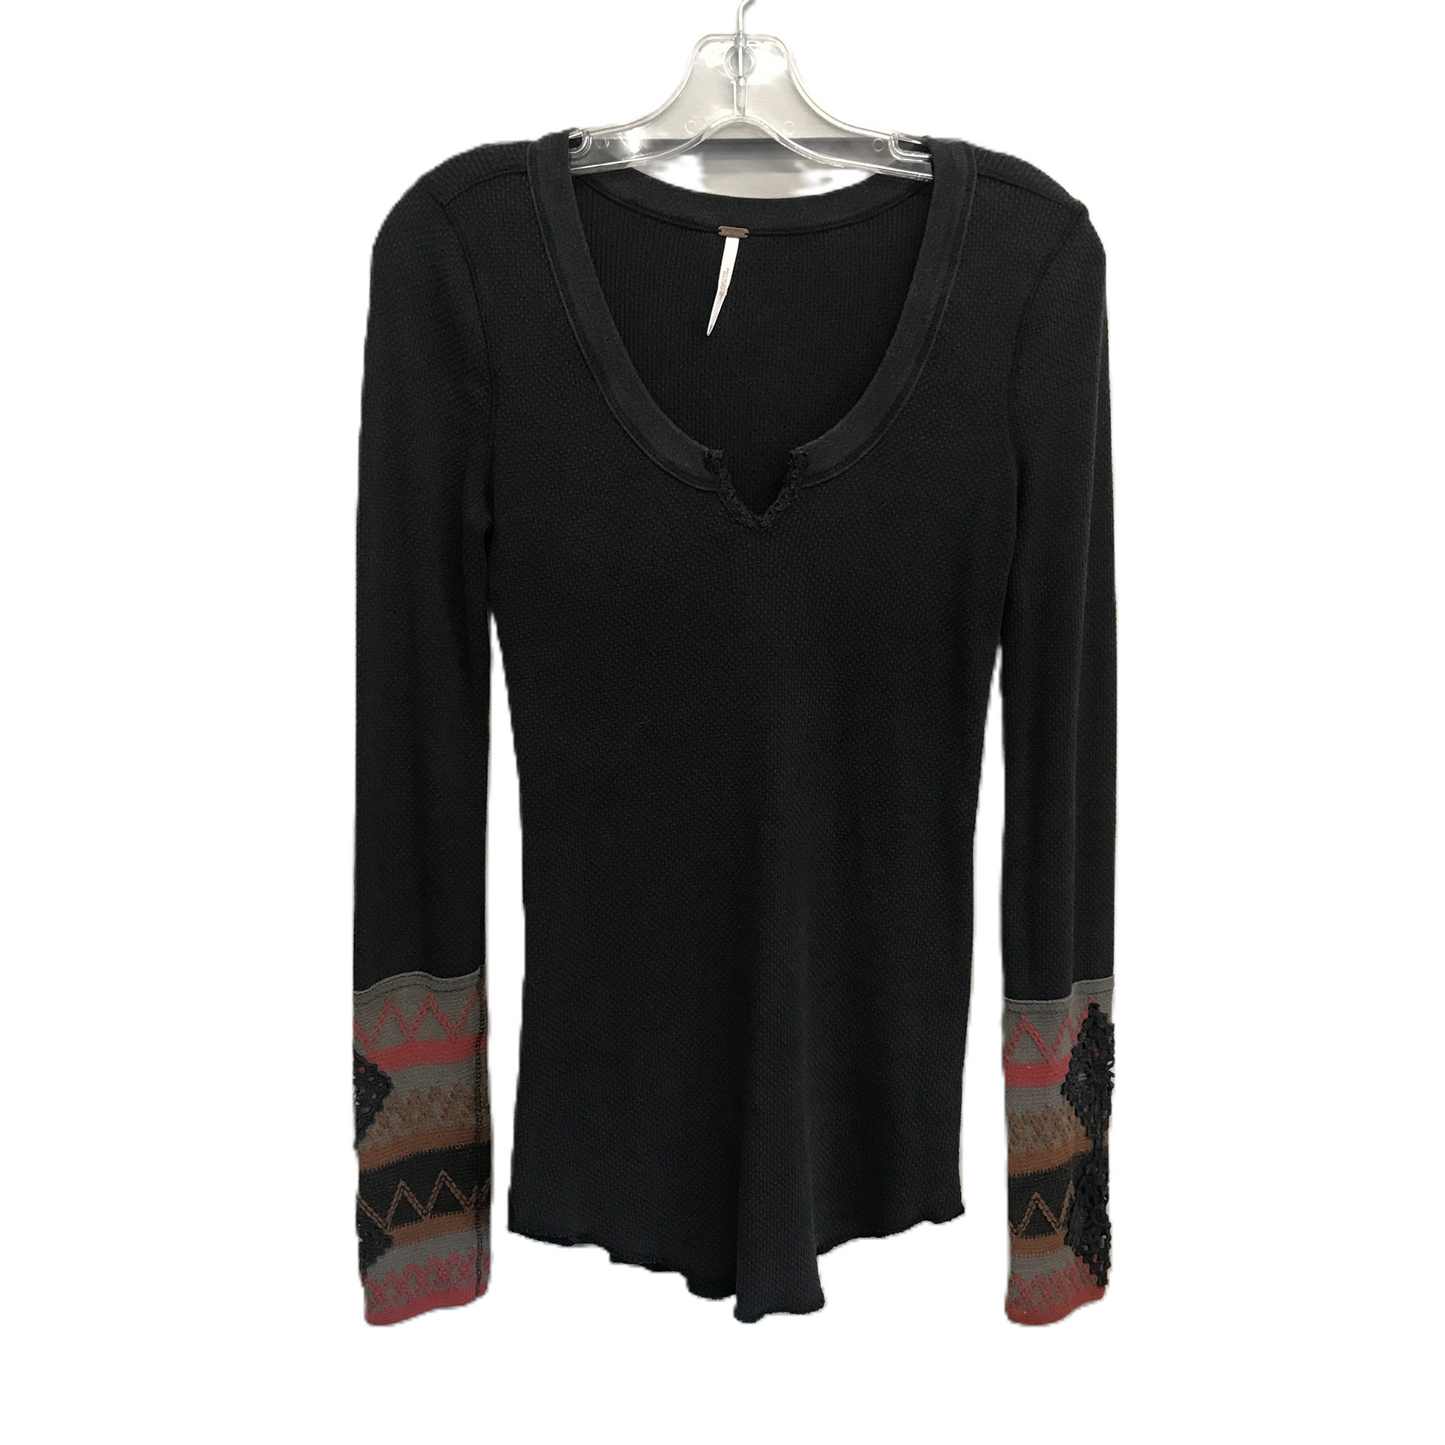 Black Top Long Sleeve By Free People, Size: M